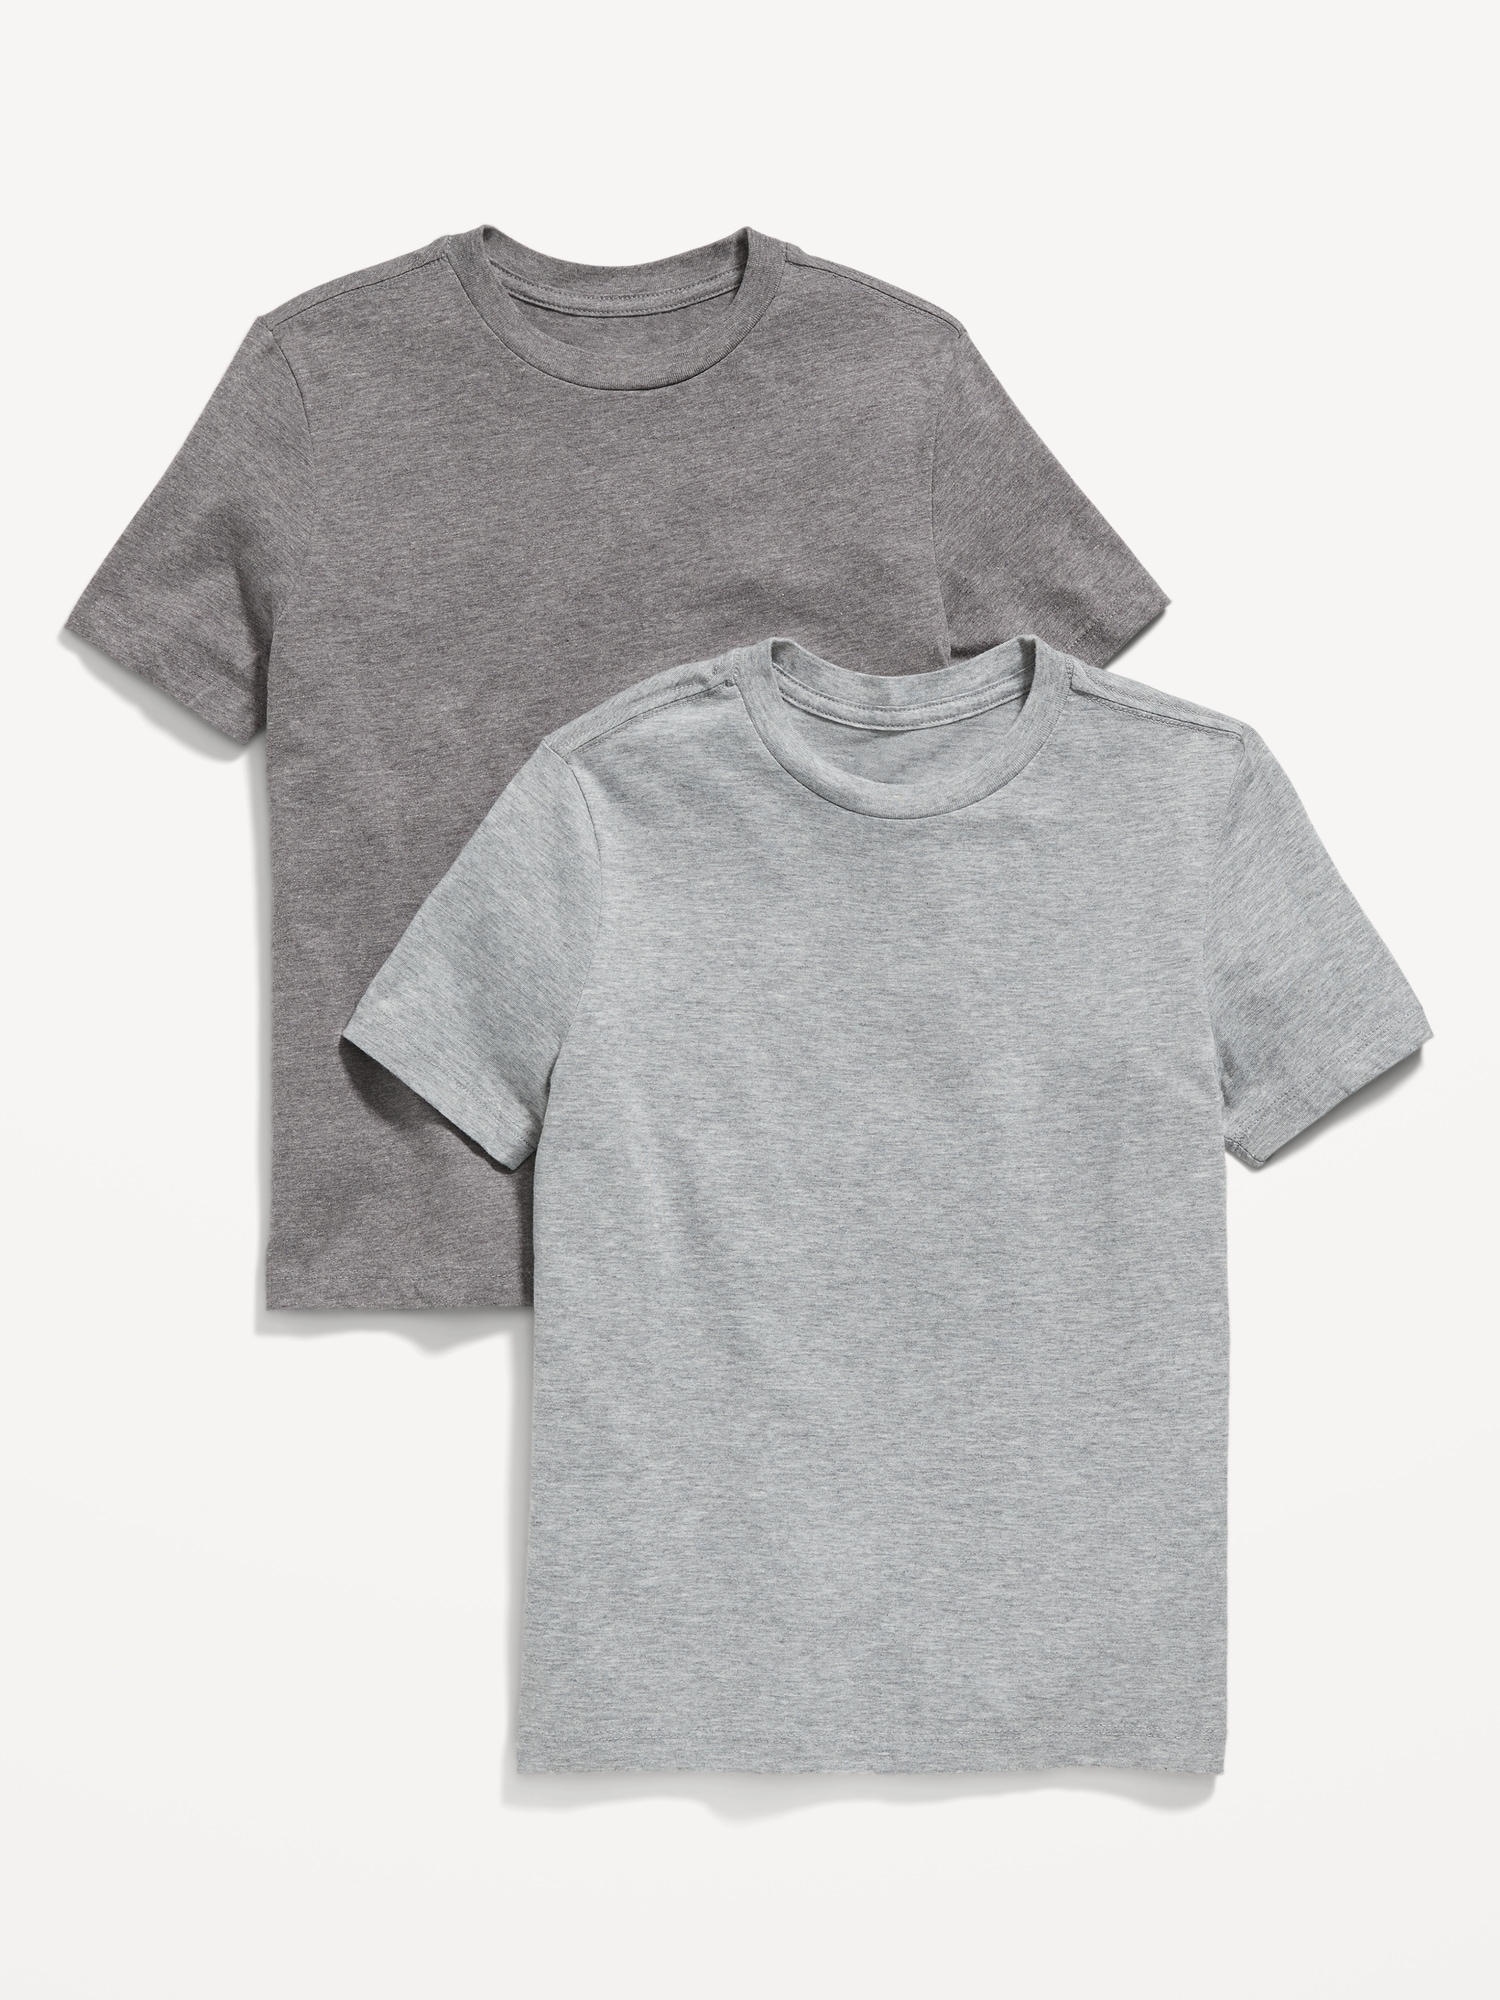 Old Navy Softest Crew-Neck T-Shirt 2-Pack For Boys gray. 1